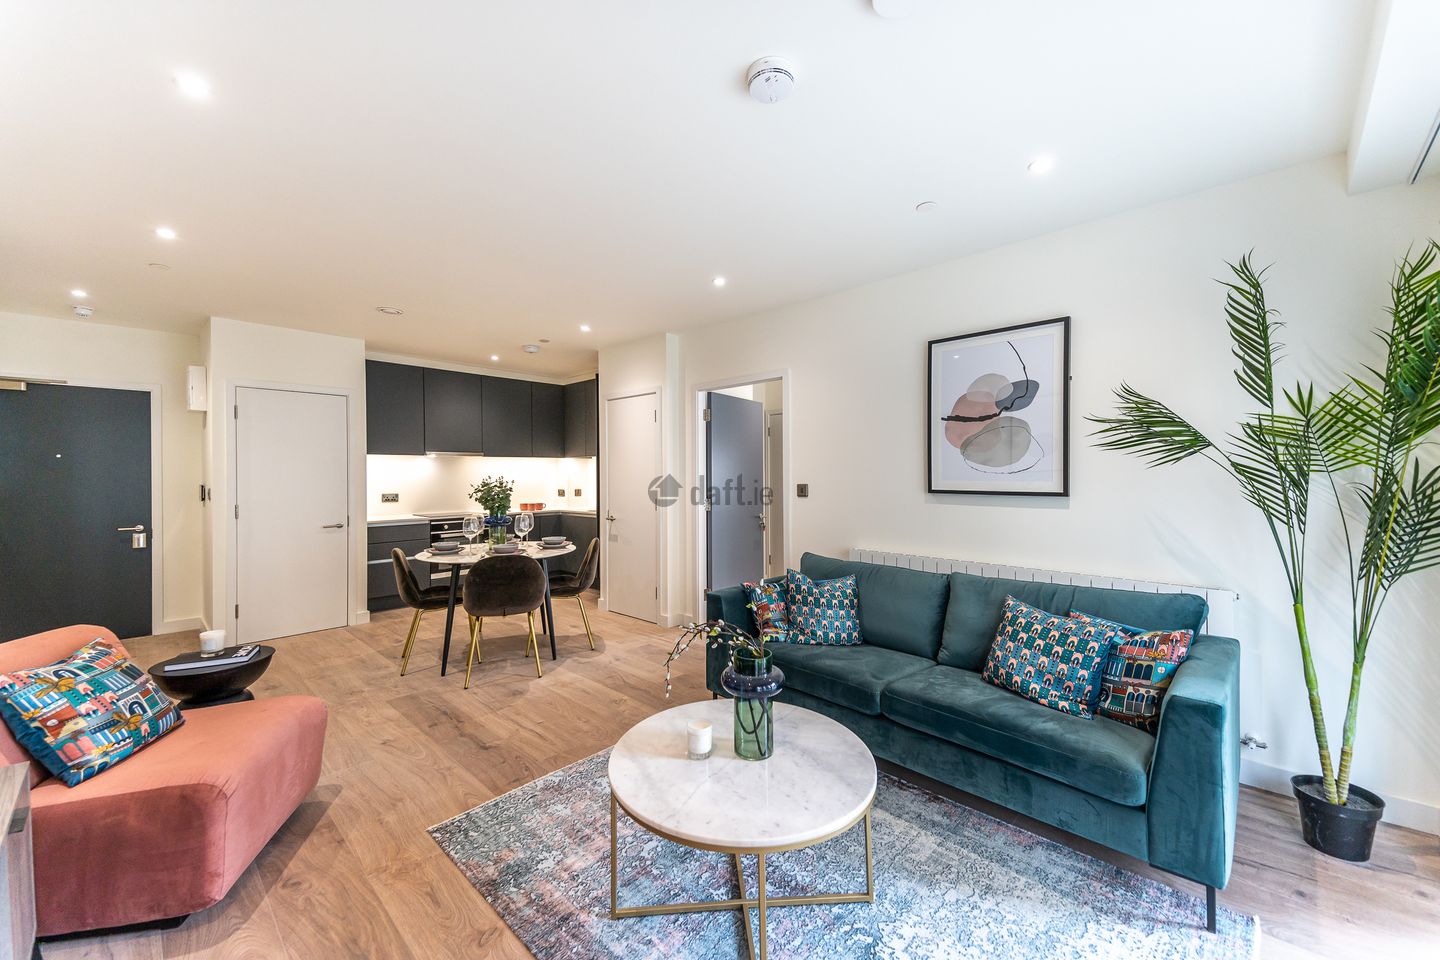 2 Bedroom Apartment, Spencer Place, Spencer Place, Dublin 1